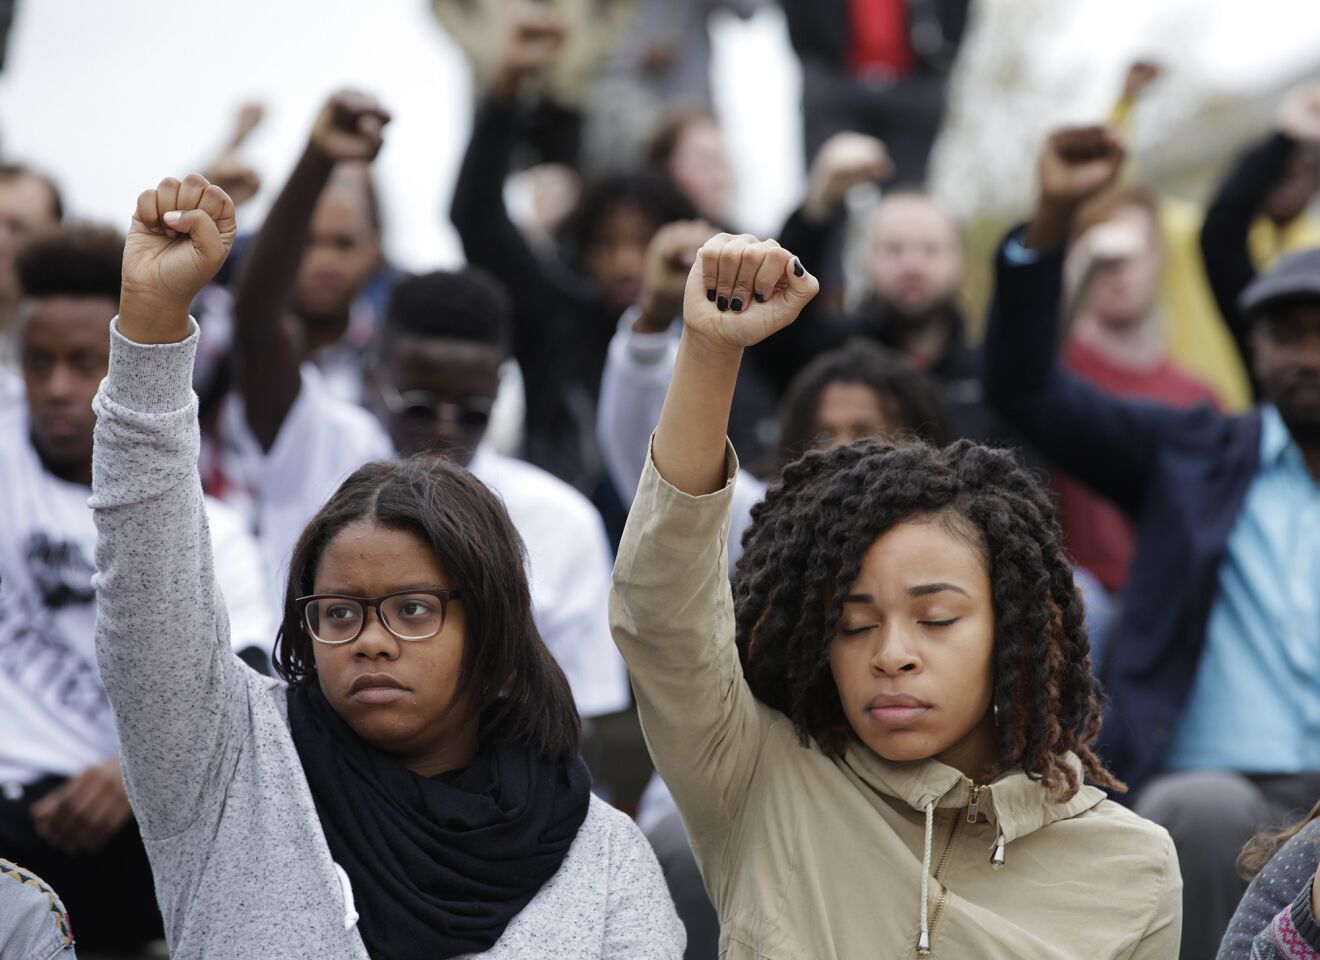 Supporters raise their fists in solidarity during a rally at Traditions Plaza on the University of Missouri campus in Columbia, Mo., calling for the resignation of the University of Missouri System President Tim Wolfe. The group organized the rally to draw attention to race relations on campus.